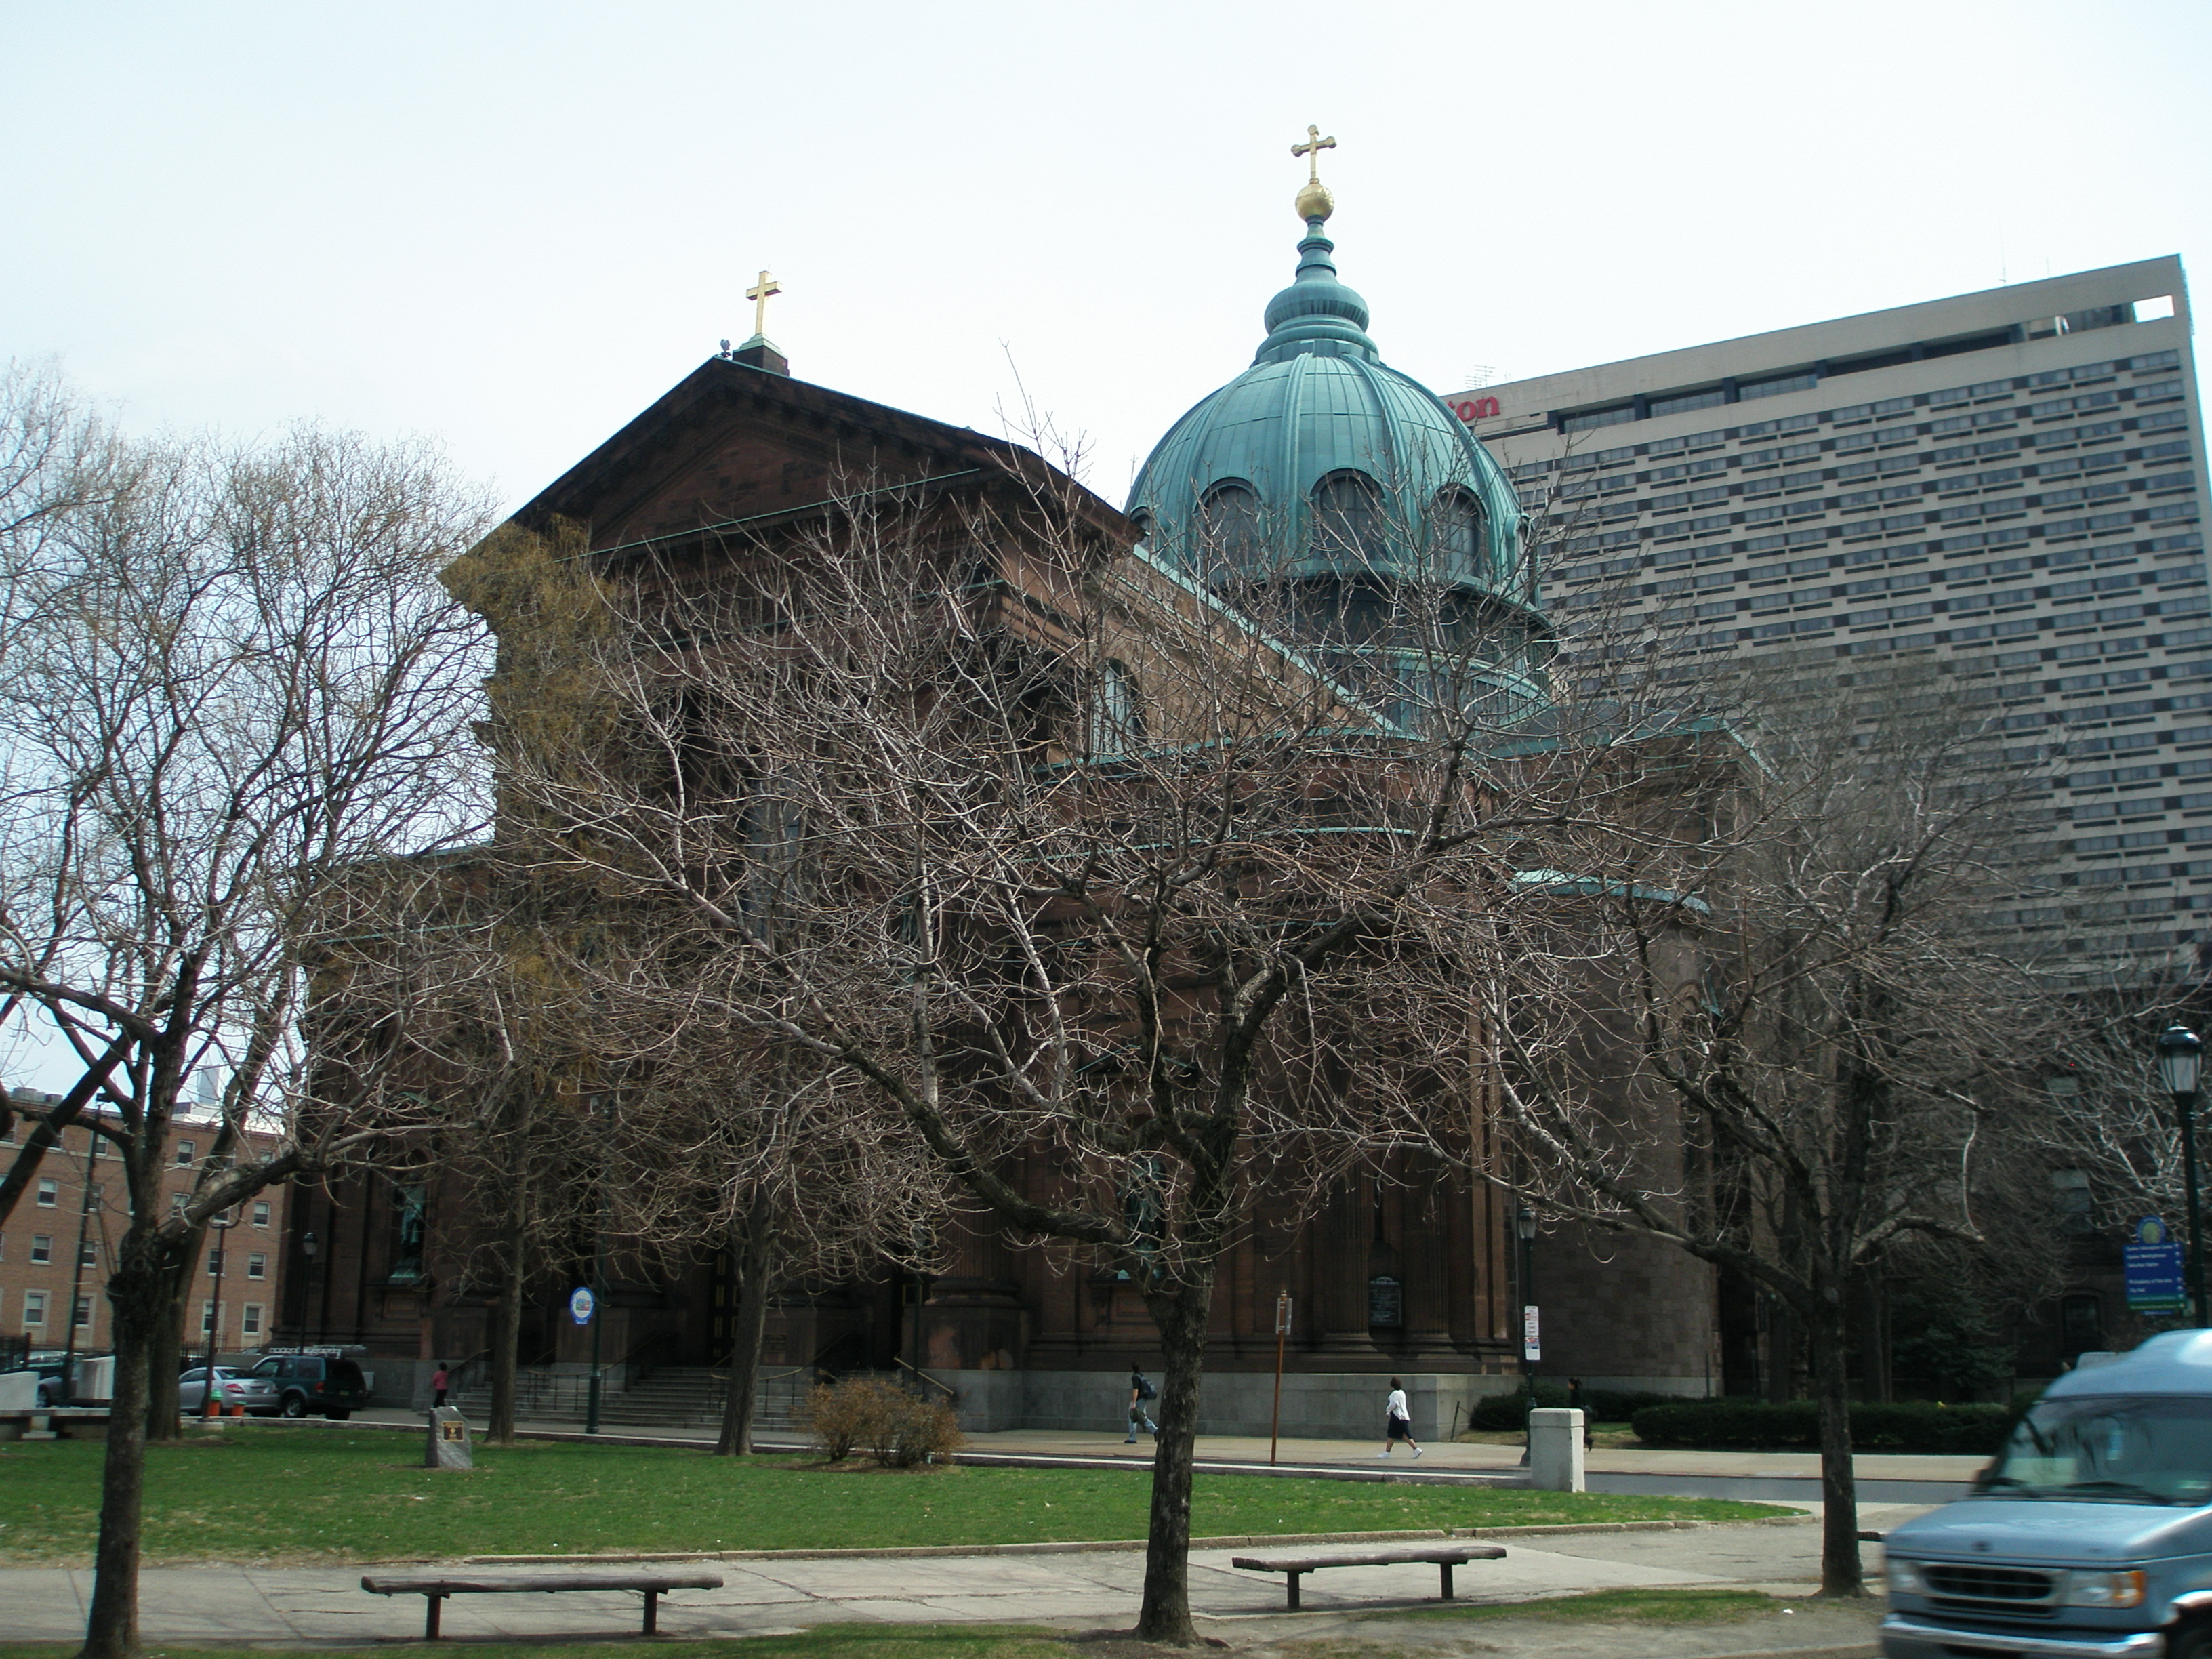 Cathedral basilica of sts. peter and paul